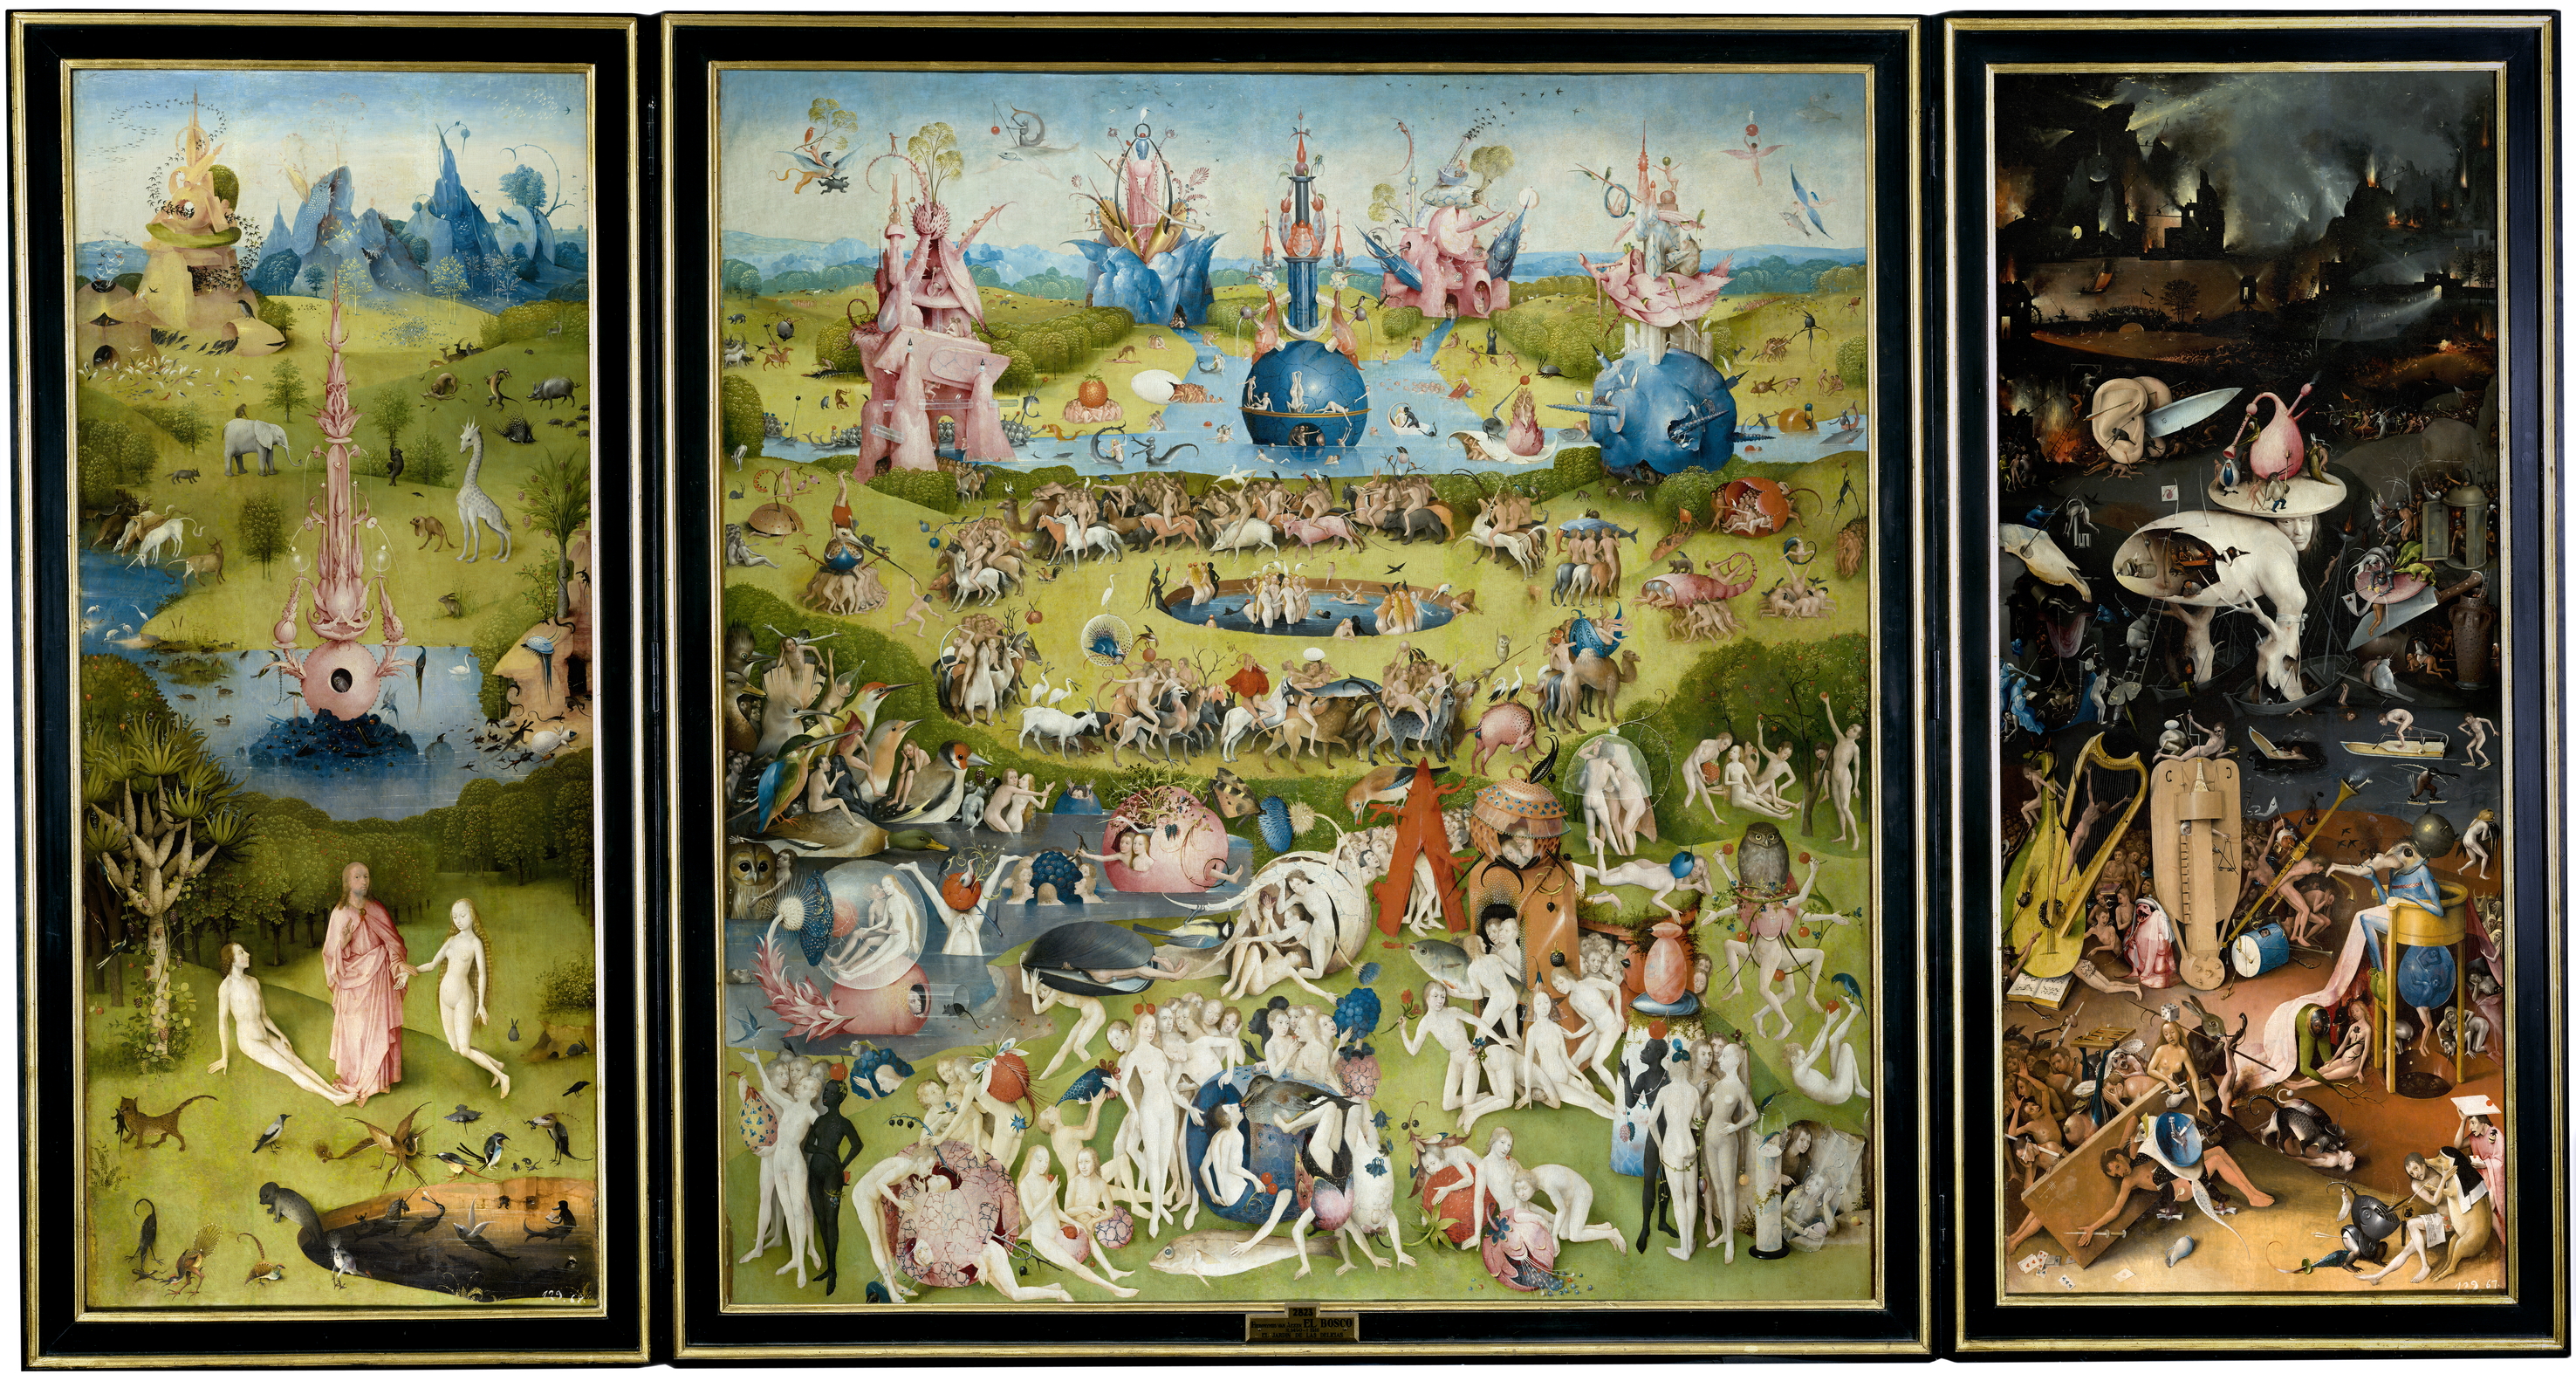 "The Garden of Earthly Delights" by Hieronymus Bosch